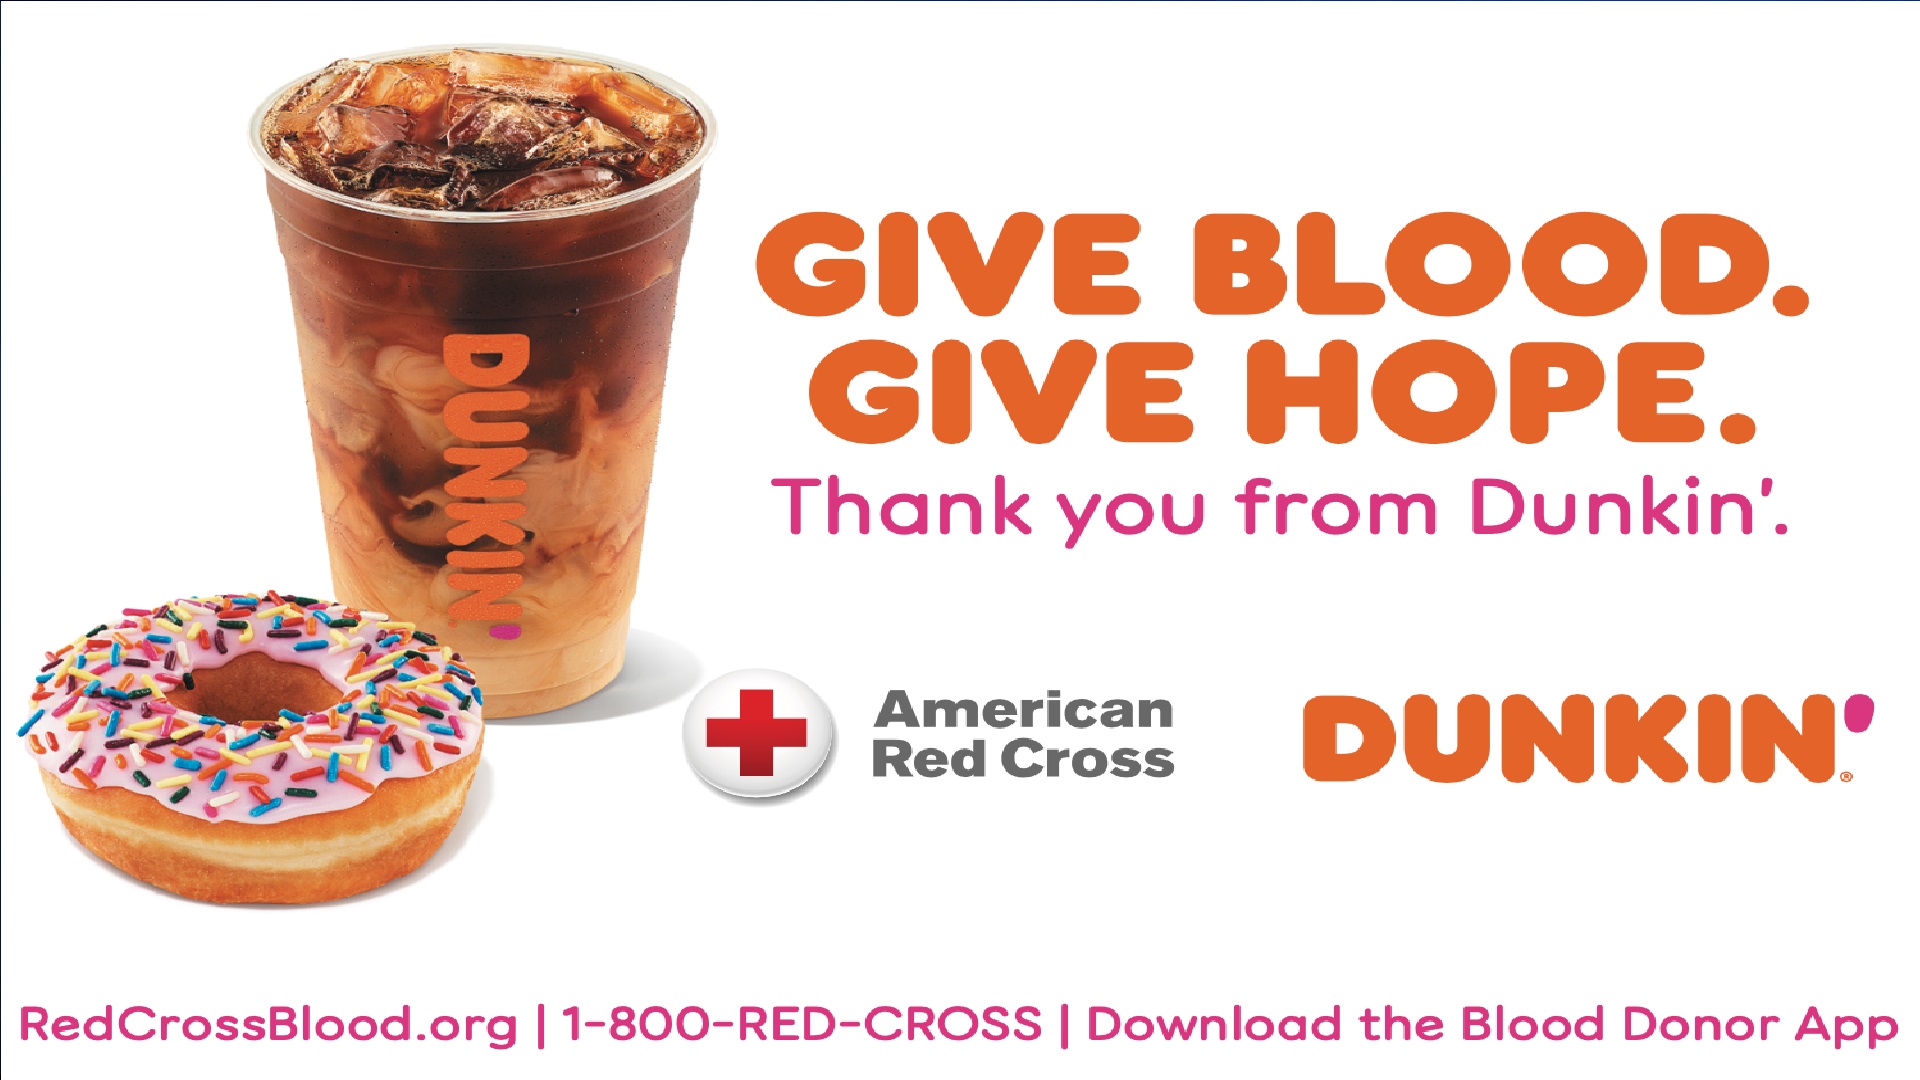 Dunkin Of Virginia Teams With American Red Cross To Recognize The